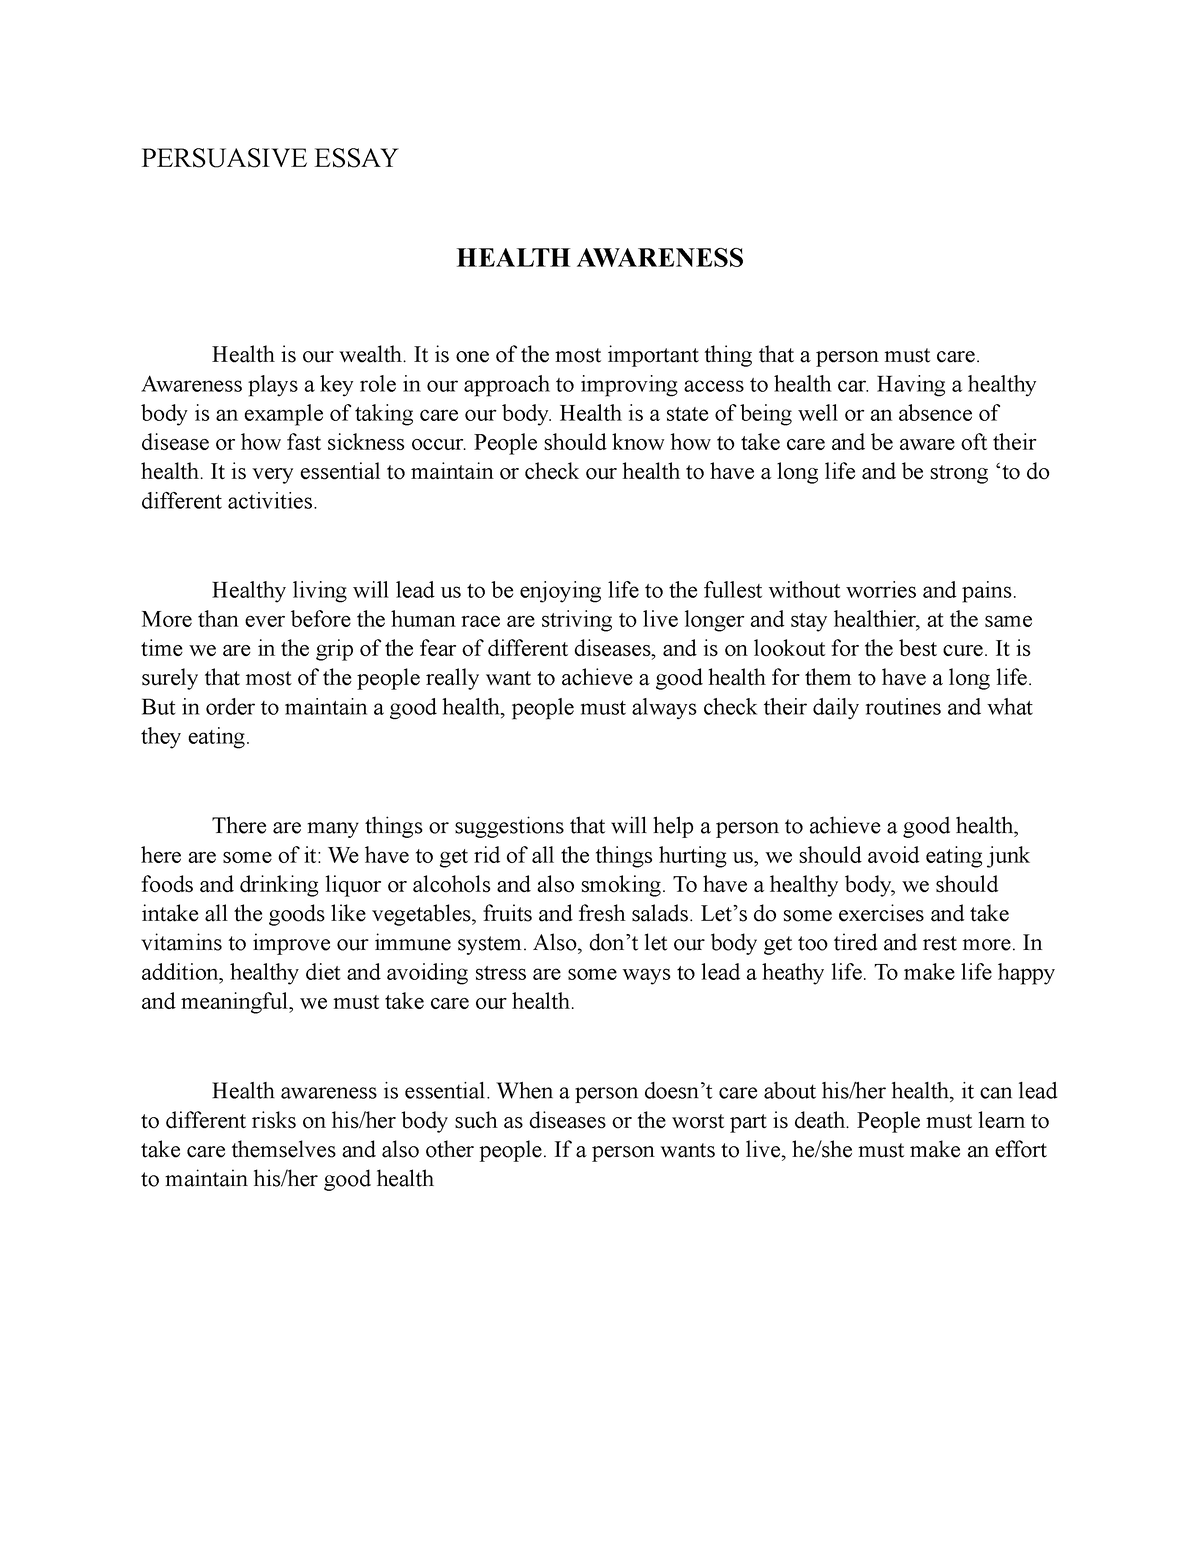 persuasive essay about health awareness introduction body conclusion